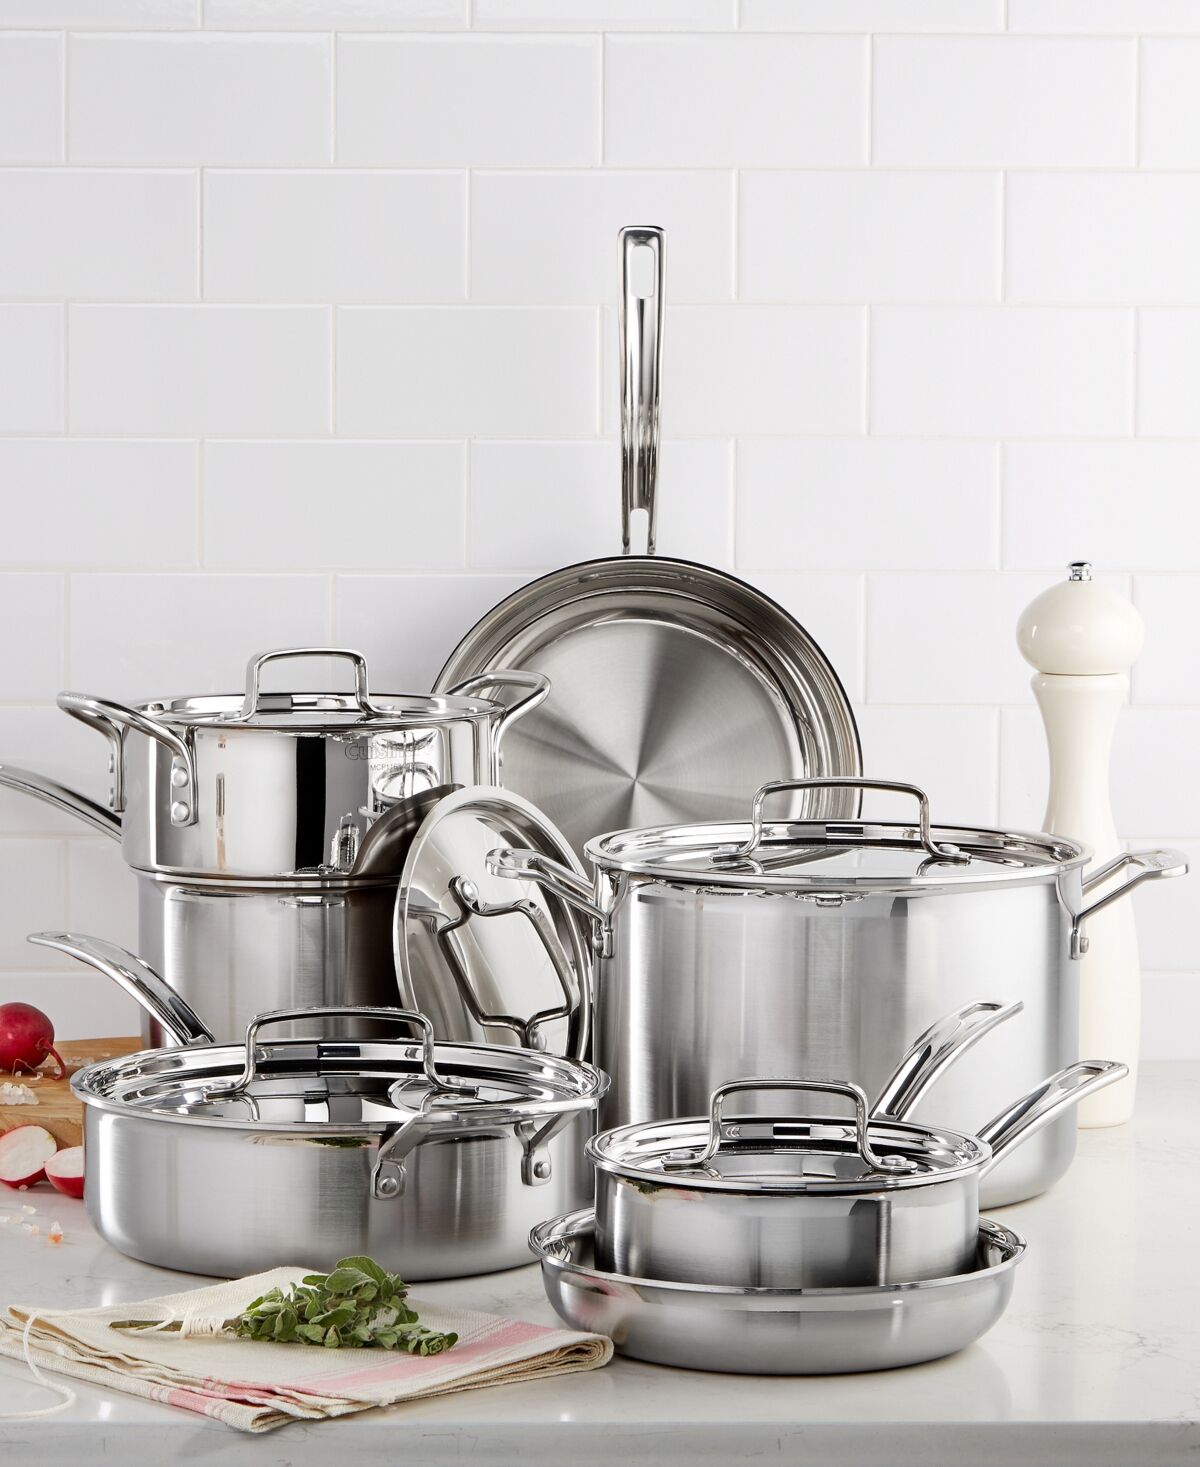 Cuisinart Multiclad Pro Tri-Ply Stainless Steel 12 Piece Cookware Set - Stainless Steel